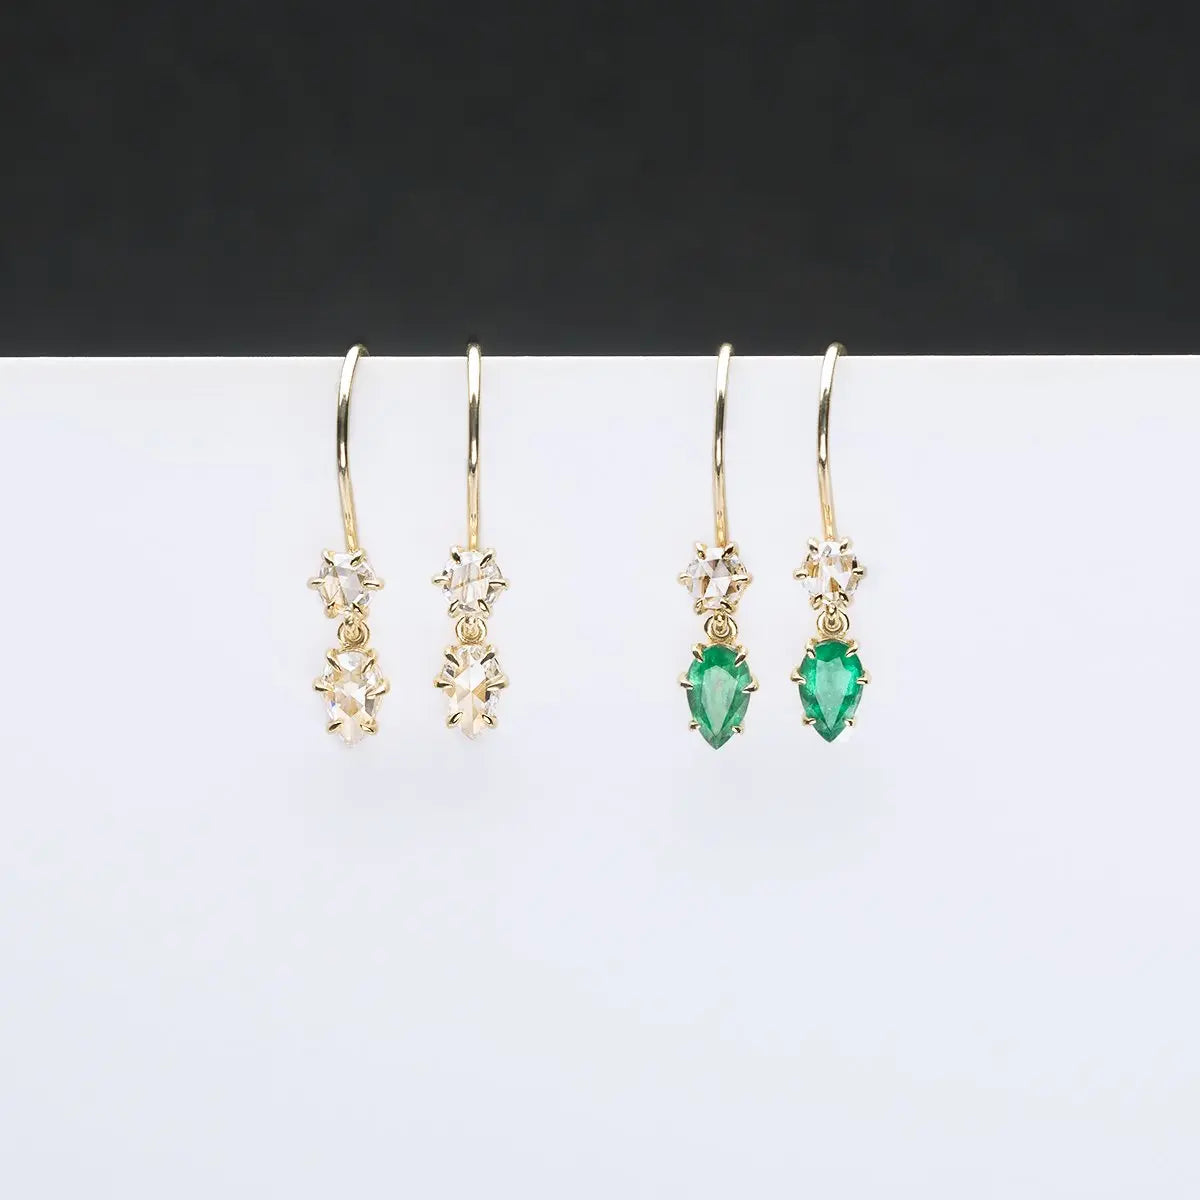 Primary Earrings - Squash Blossom Vail